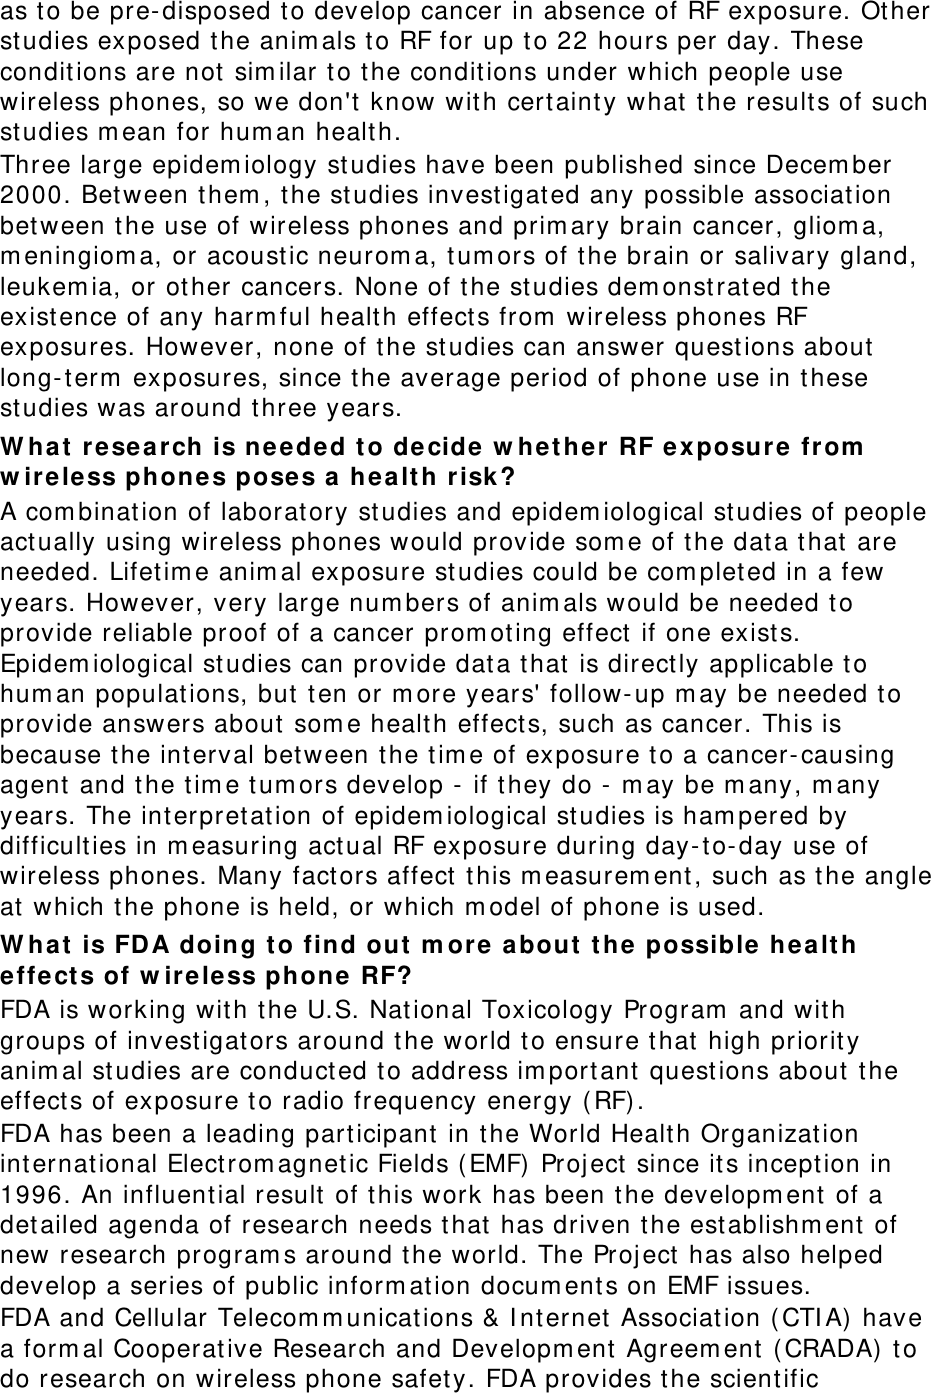 as to be pre- disposed to develop cancer in absence of RF exposure. Other studies exposed the anim als to RF for up to 22 hours per day. These conditions are not sim ilar to the conditions under which people use wireless phones, so we don&apos;t  know with cert ainty what the results of such studies m ean for hum an healt h. Three large epidem iology st udies have been published since Decem ber 2000. Between t hem , t he studies invest igated any possible association bet ween t he use of wireless phones and prim ary brain cancer, gliom a, m eningiom a, or acoust ic neurom a, t um ors of t he brain or salivary gland, leukem ia, or ot her cancers. None of t he studies dem onst rated t he existence of any harm ful health effect s from  wireless phones RF exposures. However, none of t he st udies can answer quest ions about long- t erm  exposures, since the average period of phone use in t hese studies was around three years. W ha t  r ese arch is nee ded t o de cide w het her  RF e x posure  fr om  w ir e less phones pose s a  hea lt h risk ? A com bination of laboratory st udies and epidem iological st udies of people act ually using wireless phones would provide som e of t he data t hat are needed. Lifet im e anim al exposure st udies could be com plet ed in a few years. However, very large num bers of anim als would be needed to provide reliable proof of a cancer prom ot ing effect  if one exists. Epidem iological studies can provide dat a that is directly applicable t o hum an populations, but t en or m ore years&apos; follow- up m ay be needed t o provide answers about som e health effect s, such as cancer. This is because the interval between t he tim e of exposure to a cancer- causing agent and t he tim e tum ors develop -  if they do -  m ay be m any, m any years. The interpret ation of epidem iological studies is ham pered by difficulties in m easuring act ual RF exposure during day-to-day use of wireless phones. Many fact ors affect  this m easurem ent, such as the angle at  which t he phone is held, or which m odel of phone is used. W ha t  is FDA doing t o find out  m ore a bout  t he possible healt h effe ct s of w ir eless phone RF? FDA is working with t he U.S. National Toxicology Program  and with groups of invest igators around the world t o ensure that high priority anim al studies are conduct ed t o address im port ant  quest ions about t he effect s of exposure to radio frequency energy ( RF) . FDA has been a leading participant  in the World Health Organizat ion international Elect rom agnet ic Fields (EMF) Project  since its inception in 1996. An influential result of t his work has been the developm ent  of a det ailed agenda of research needs t hat has driven t he est ablishm ent of new research program s around the world. The Project  has also helped develop a series of public inform ation docum ents on EMF issues. FDA and Cellular Telecom m unications &amp; I nternet Association ( CTI A)  have a form al Cooperative Research and Developm ent  Agreem ent  ( CRADA)  to do research on wireless phone safet y. FDA provides t he scient ific 